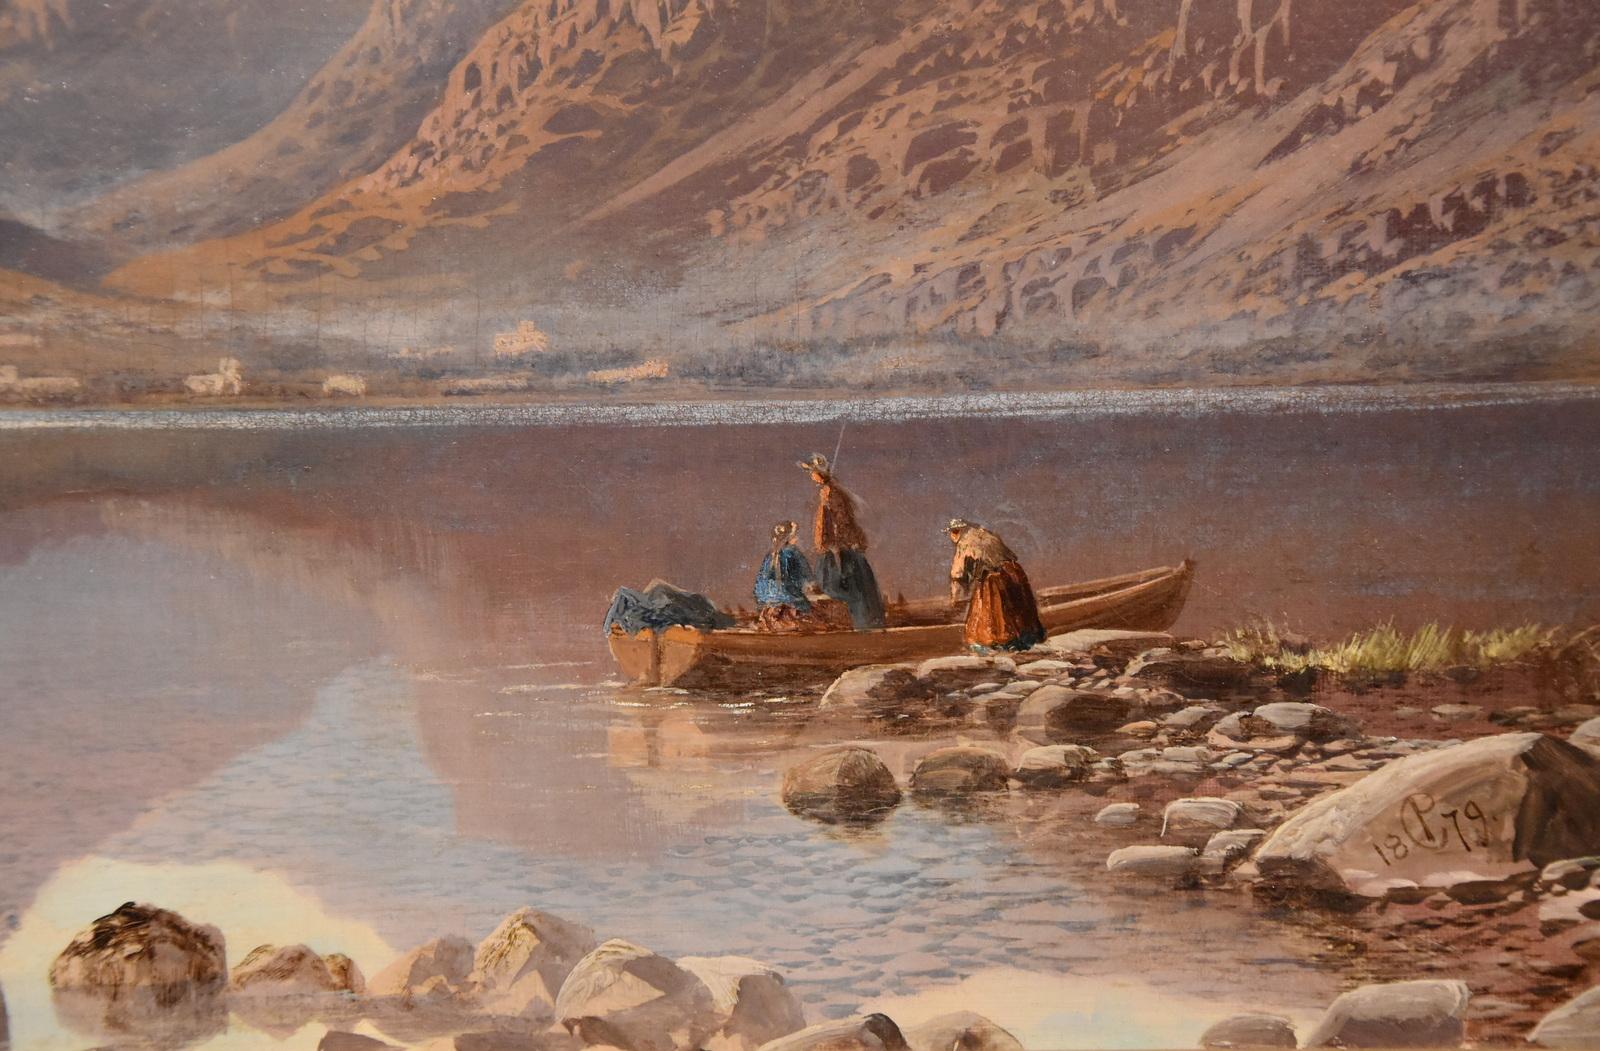 Oil Painting by Charles Pettitt “Early Morning, Coniston Lake and Mountains, North Lancashire” 1831-1885. Charles was a Birmingham painter of mountain scenes, espesically the Lake district. Son and pupil of Joseph Pettitt, he exhibited at the Royal